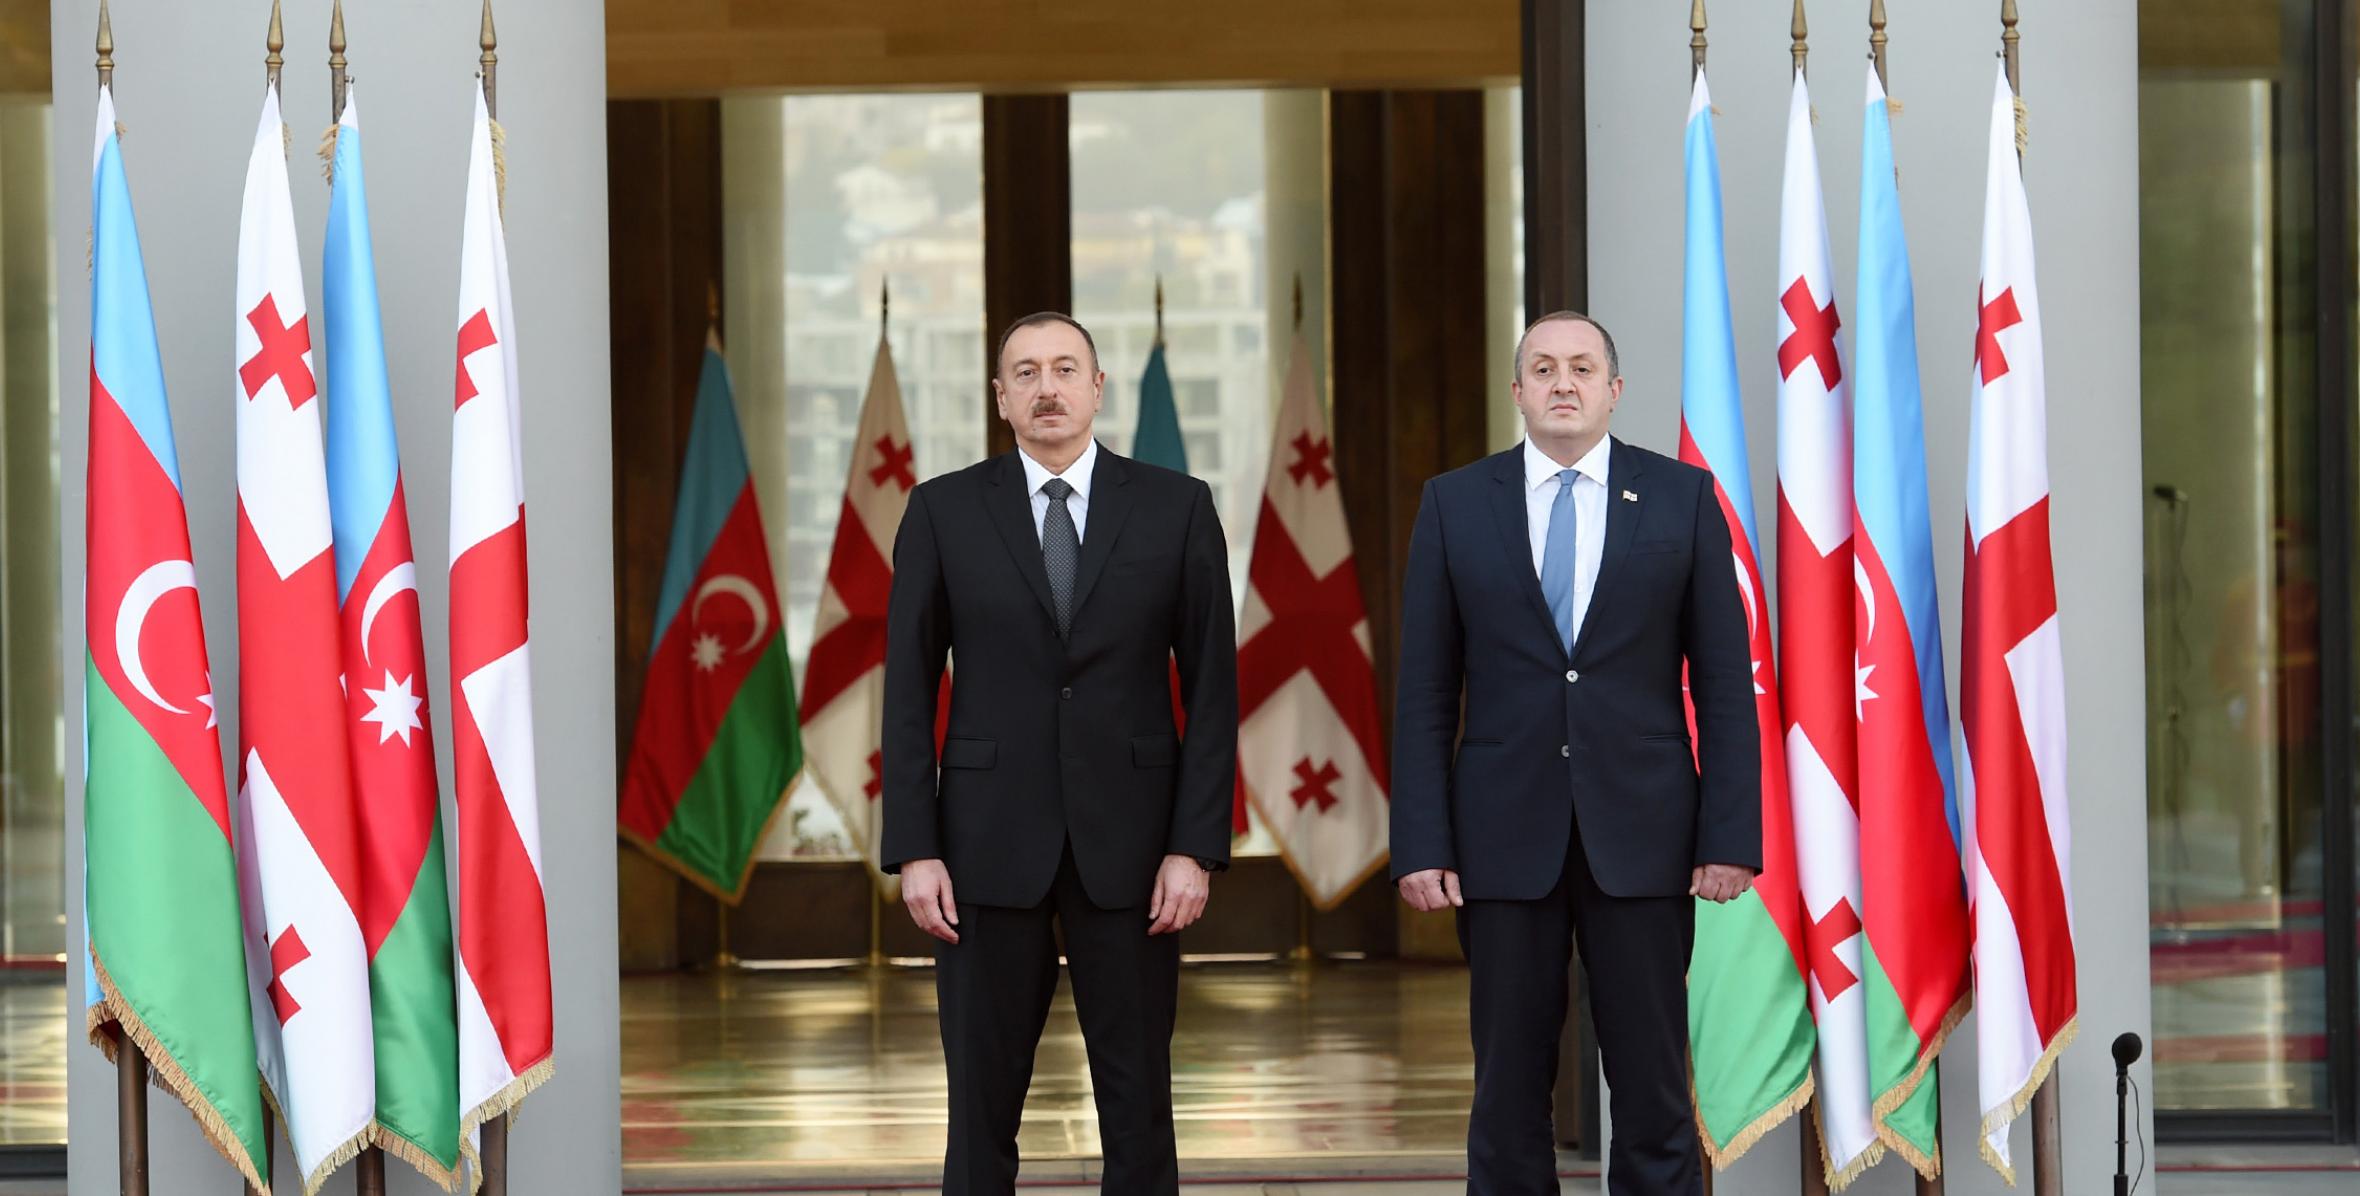 Official welcoming ceremony for Ilham Aliyev was held in Tbilisi